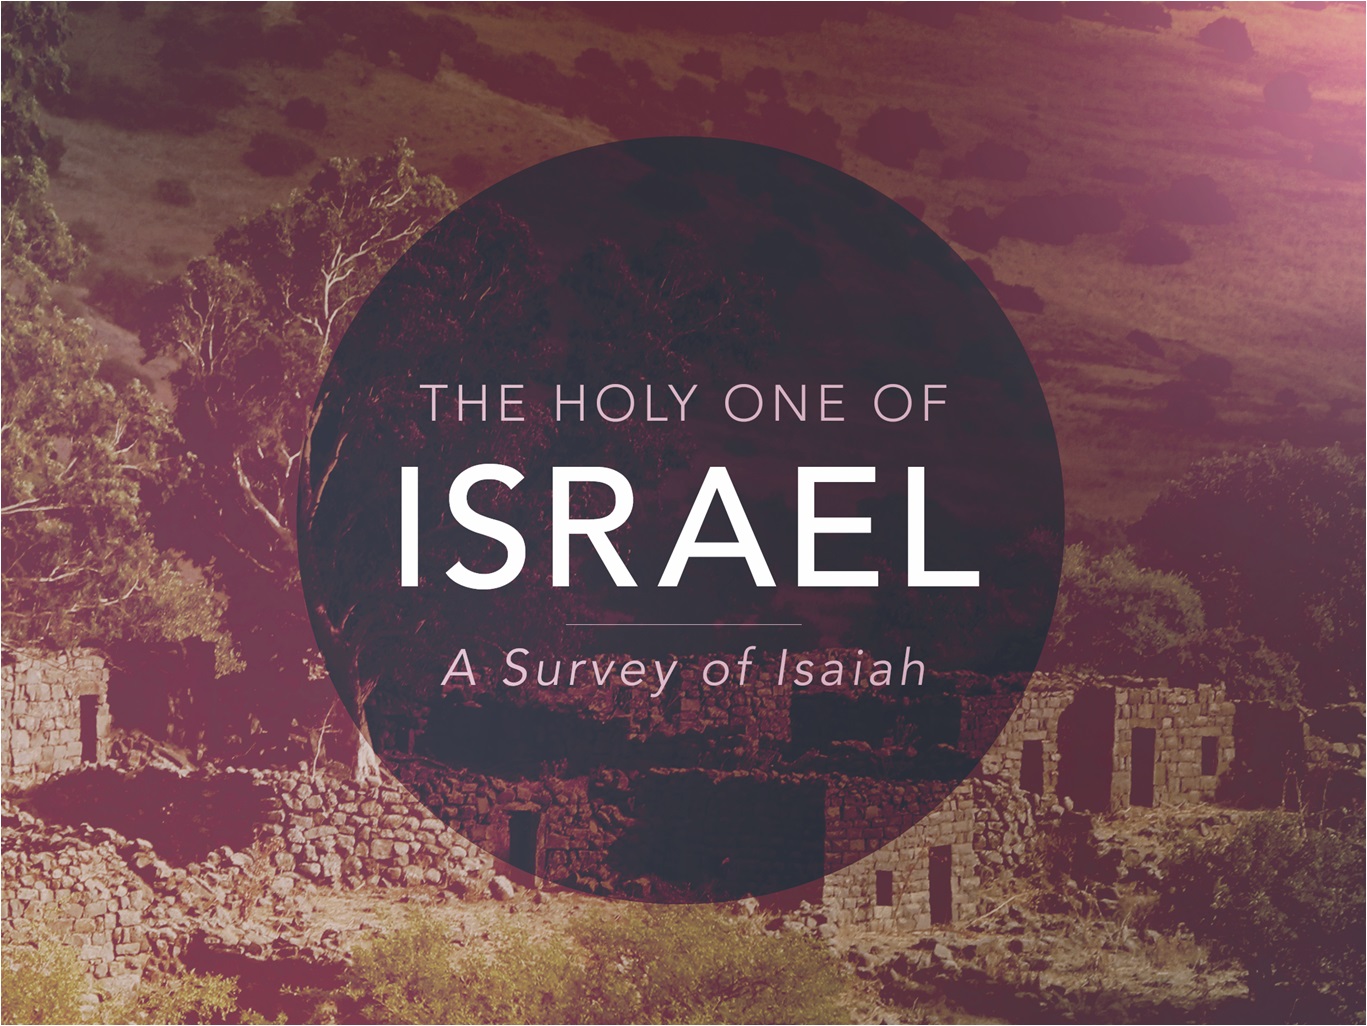 The Holy One of Israel: One of these is not like the other